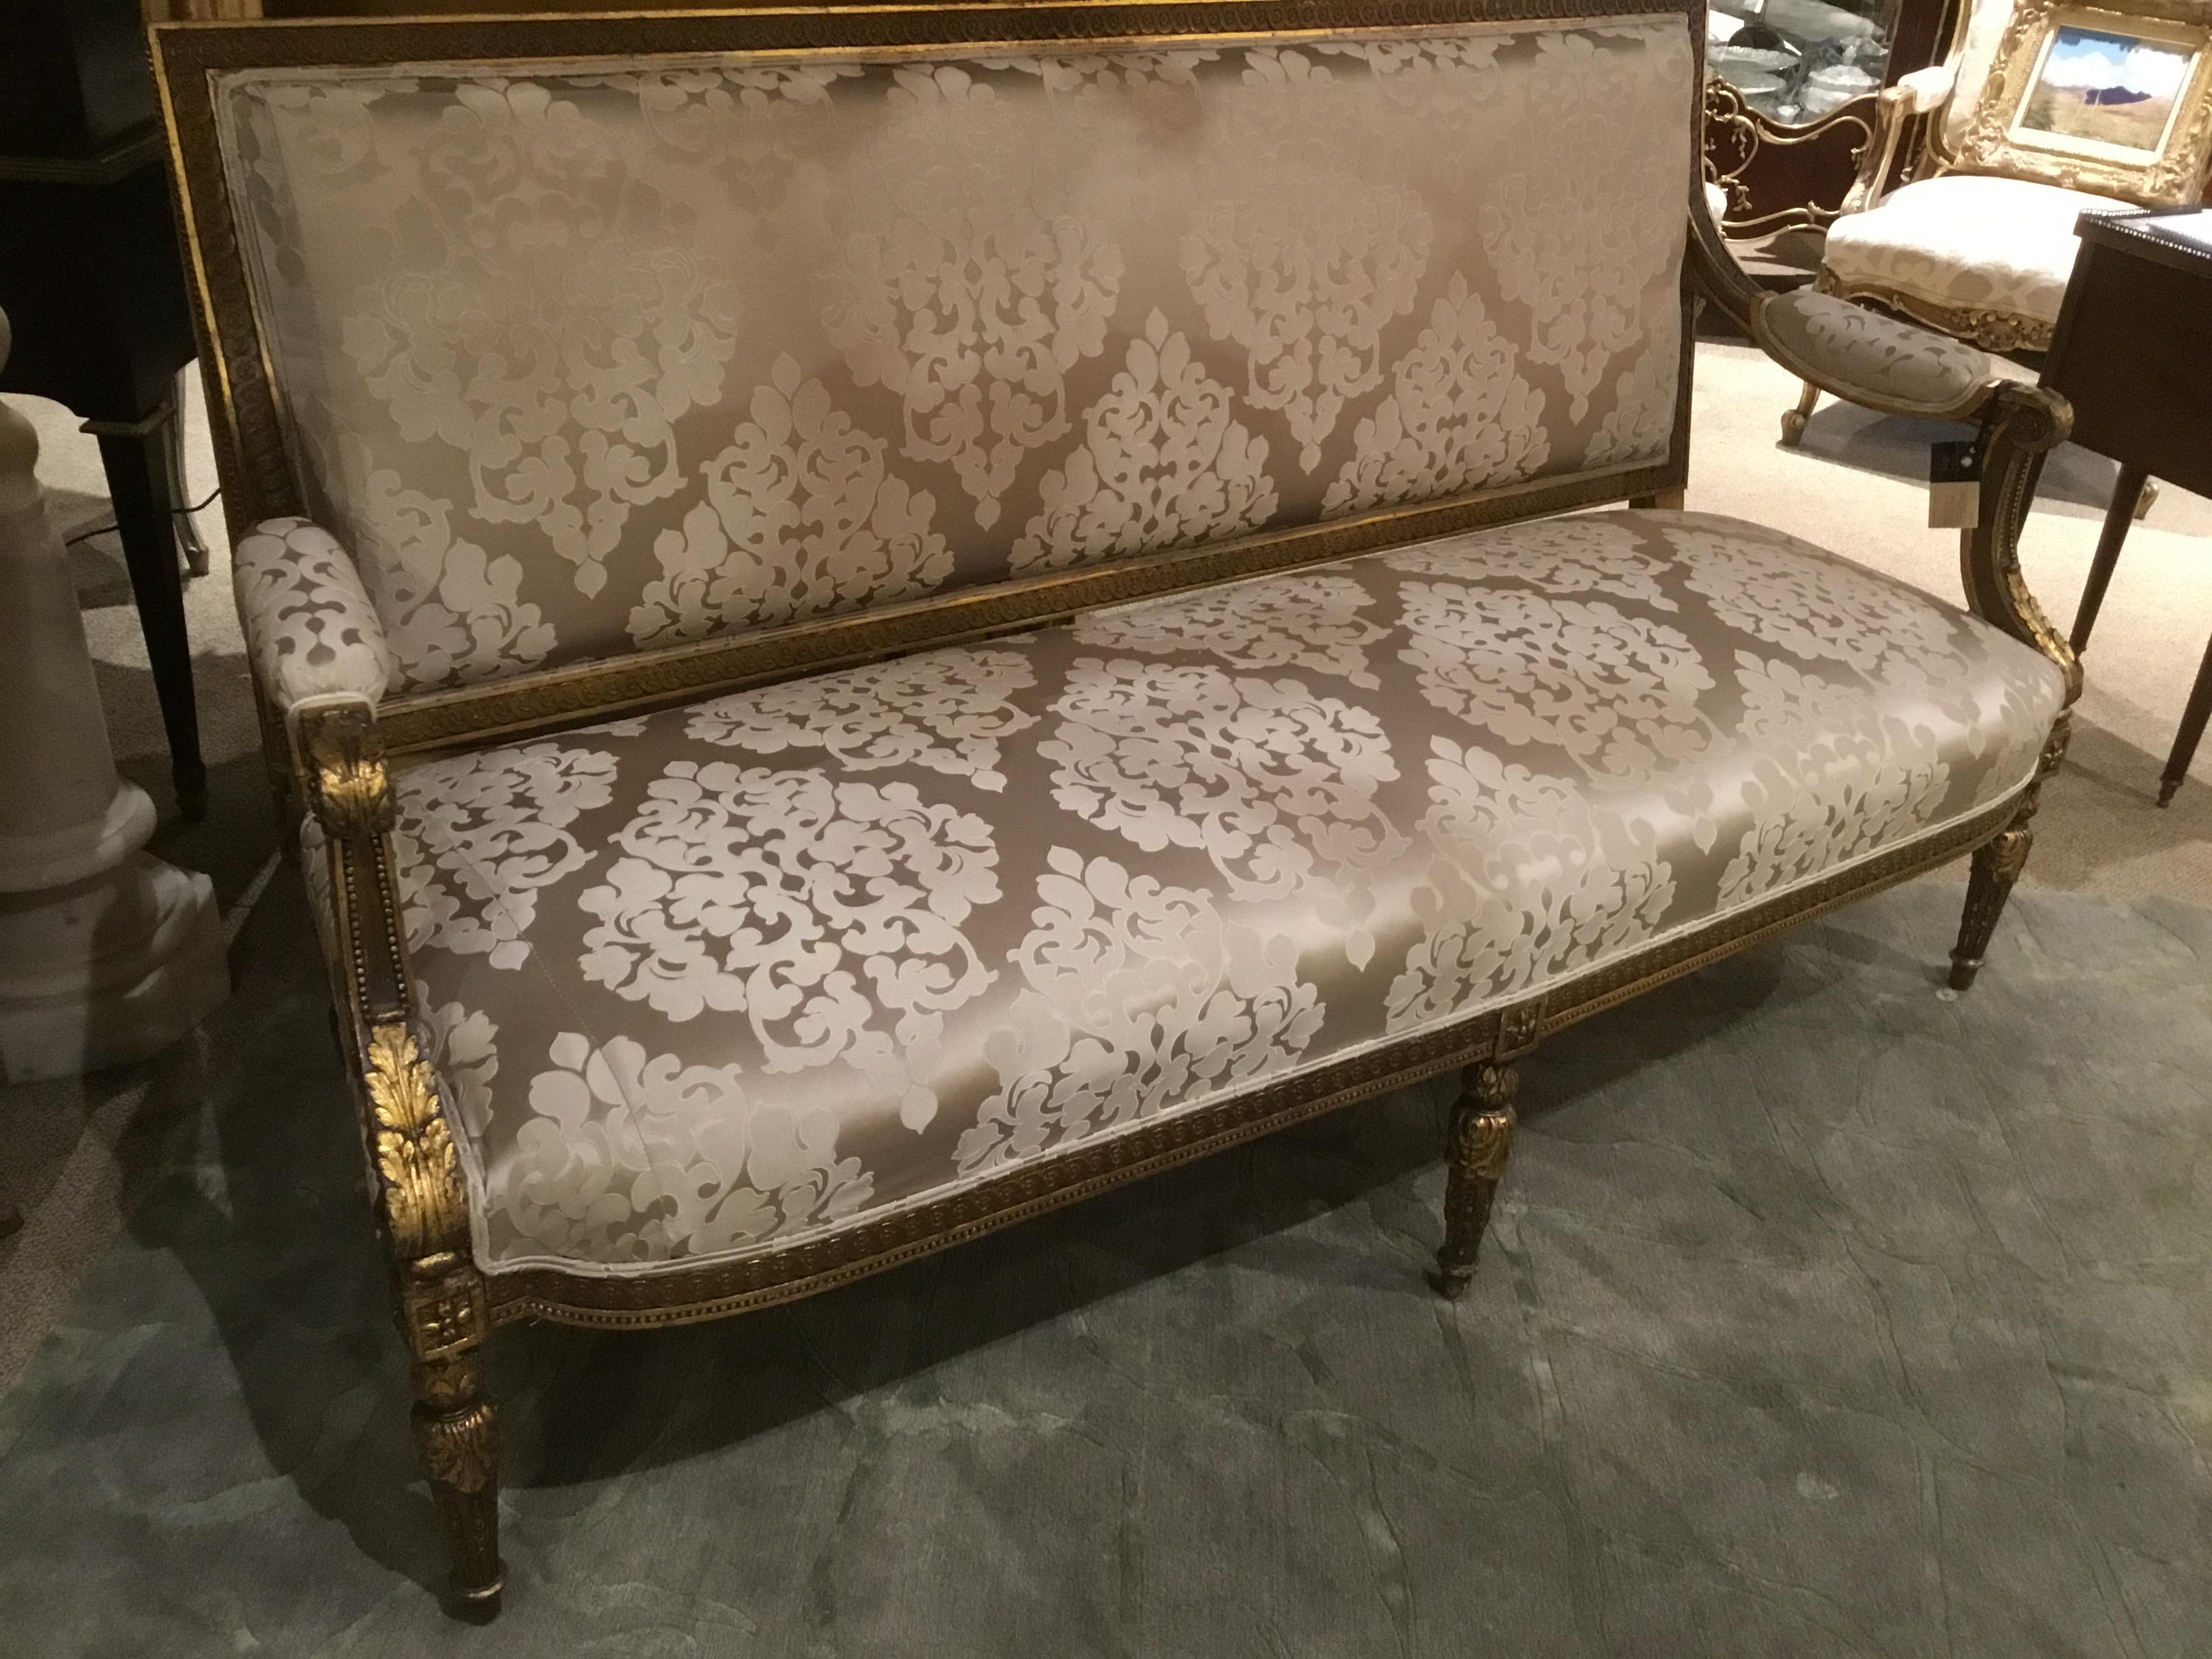 Beautifully carved settee in the Louis XVI-style with very fine carving
In the Kriege style. Reeded carved legs and curved arms embellish
This lovely piece. Foliate gilt arms and beading with gilt highlights
Make this piece exceptional.